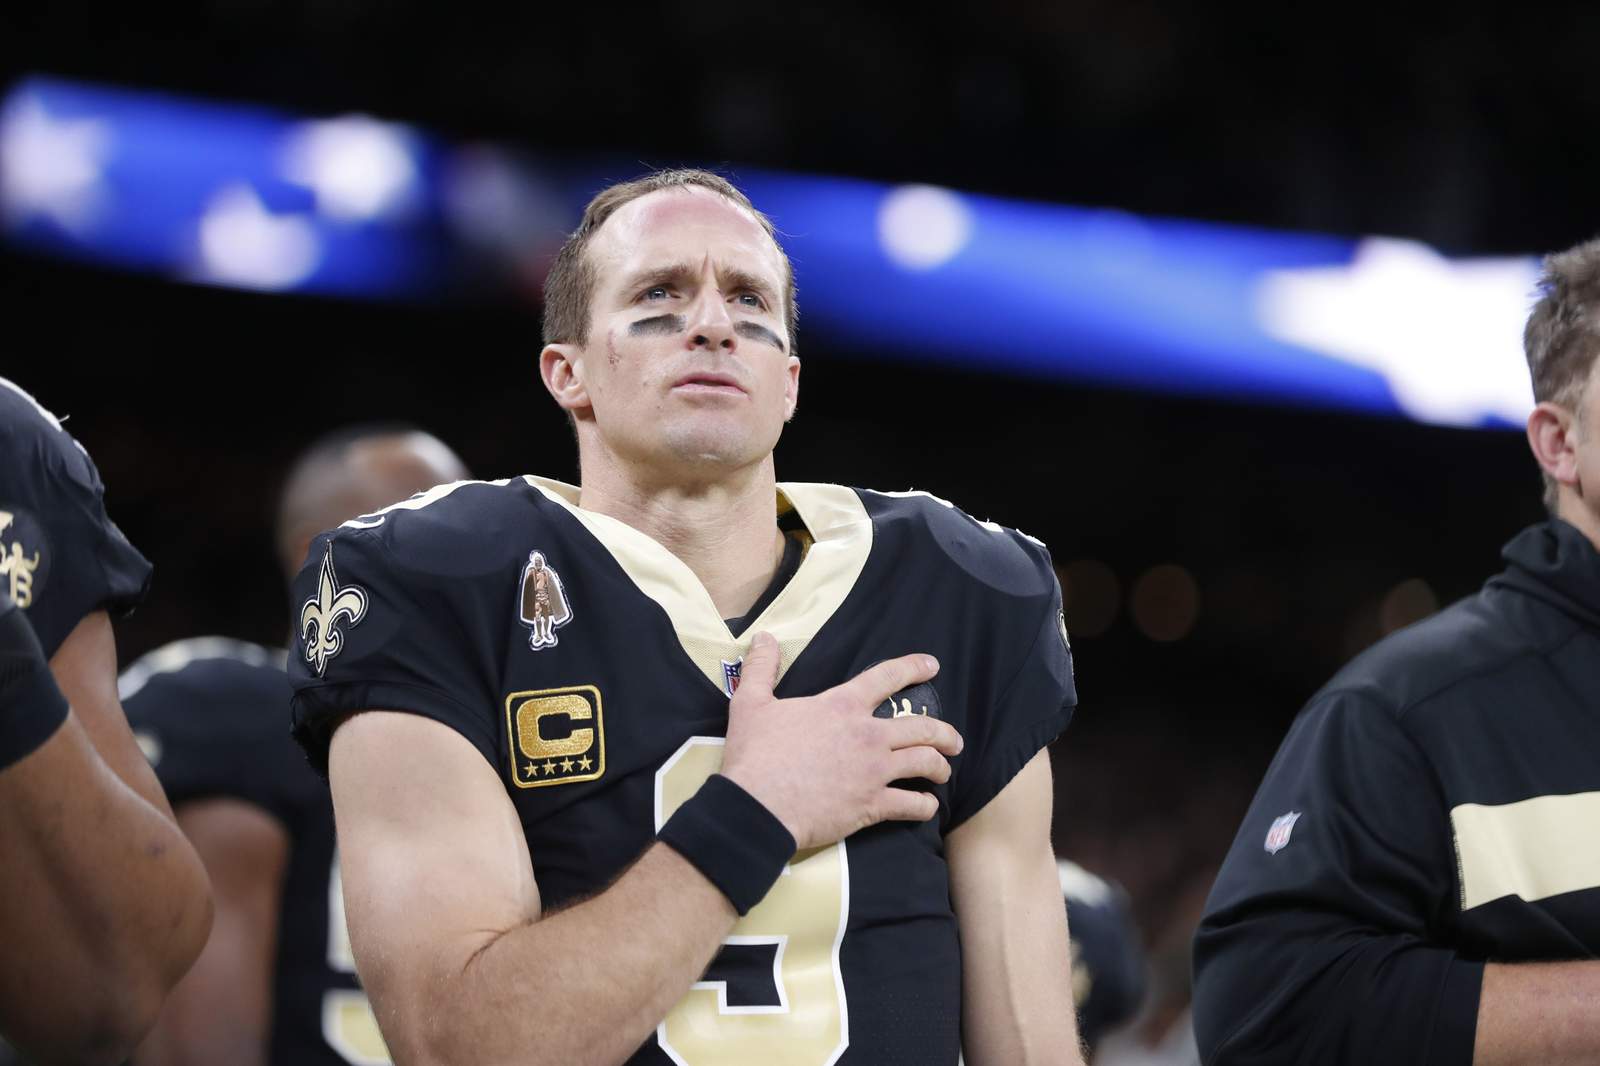 Drew Brees will stand for national anthem, but respects those who kneel